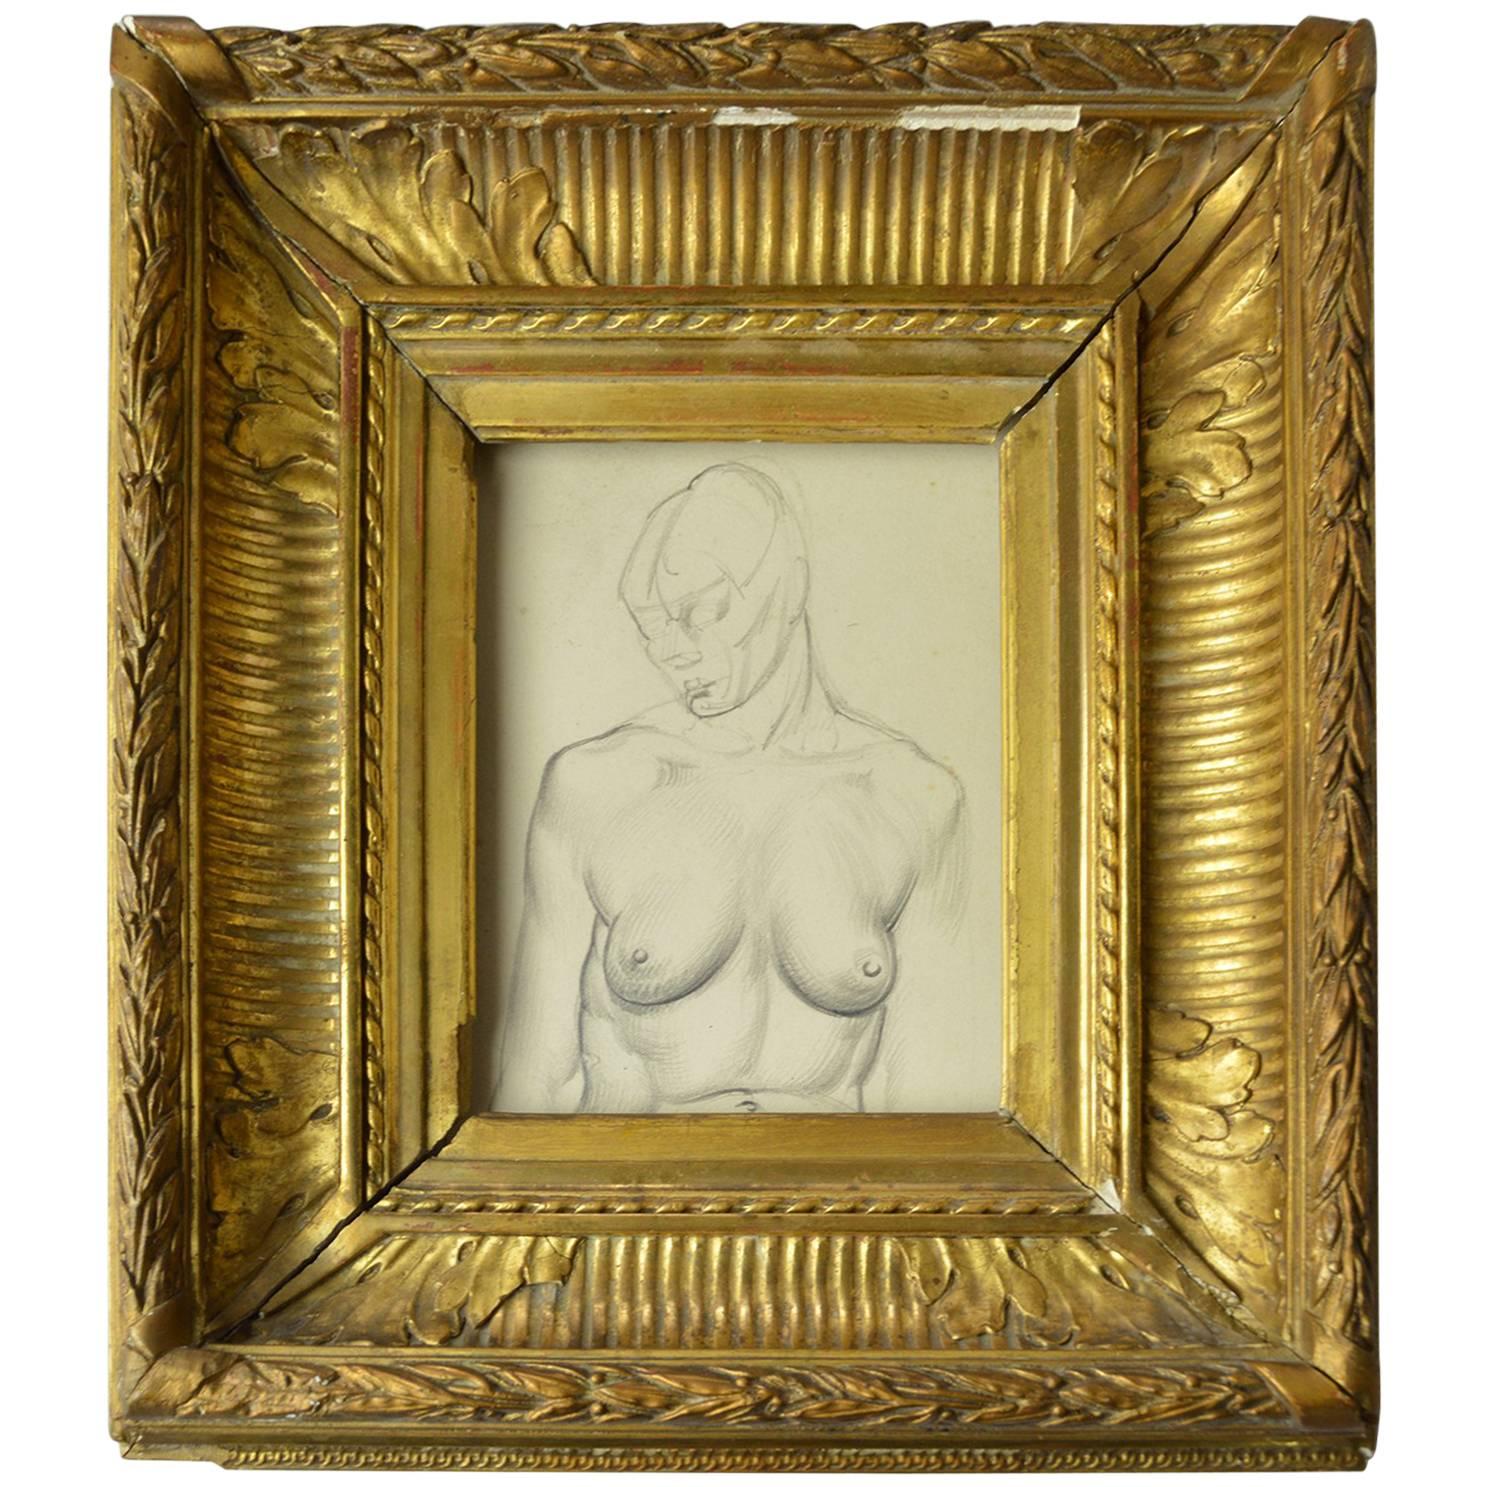 Drawing of a Female Nude Torso by Peter William Ibbetson, circa 1930